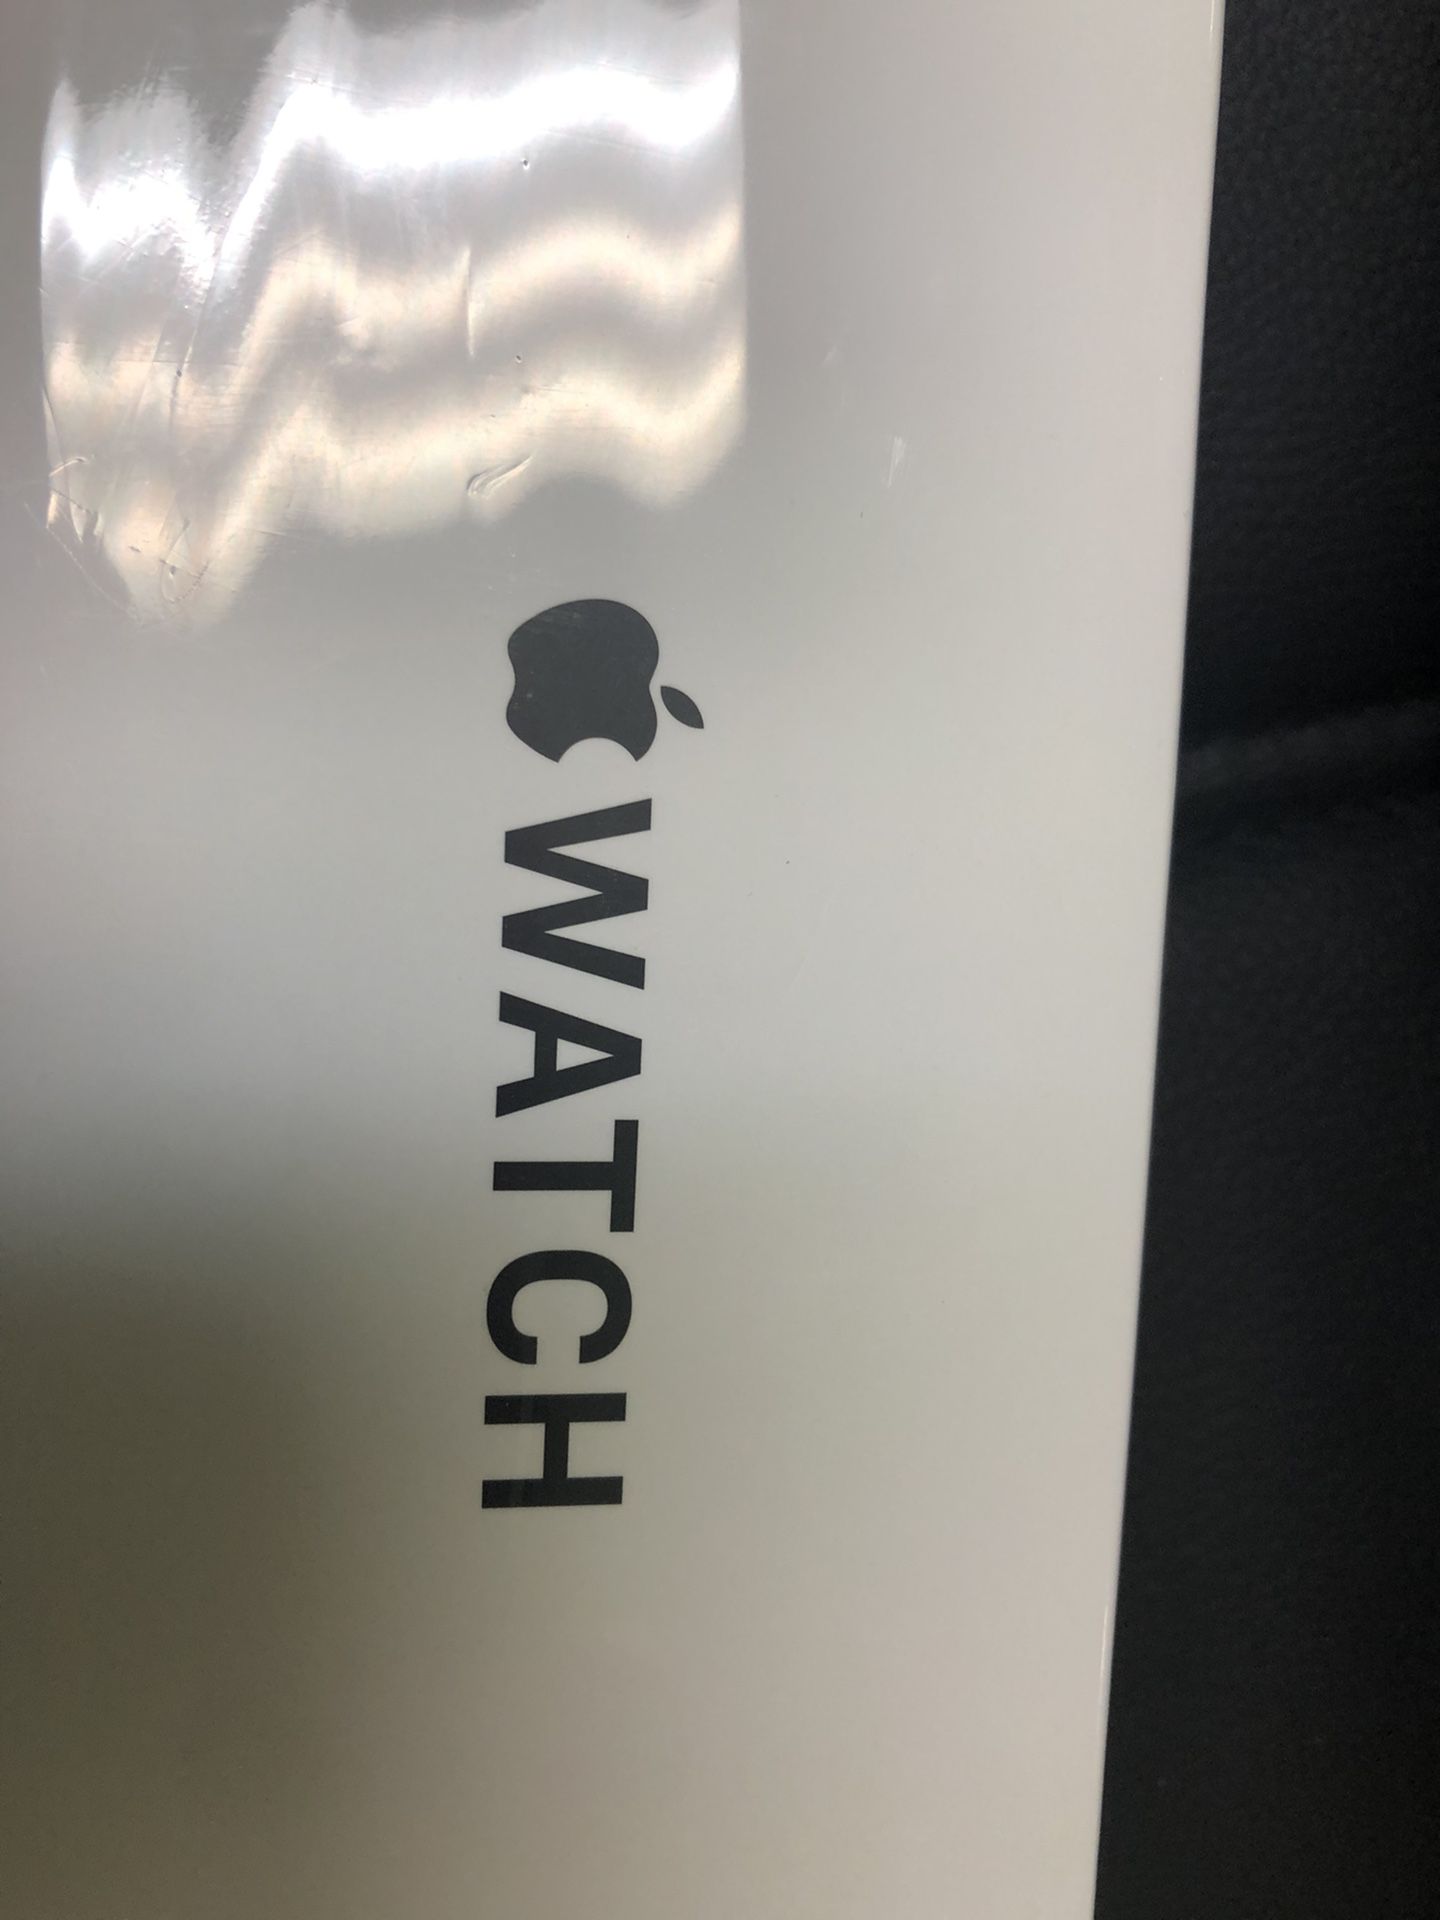 Apple Watch ⌚️ SE New In The Box 44mm Bought Yesterday $309 At Best Buy Get It Cheaper With Full Warranty Can Show The Receipt 